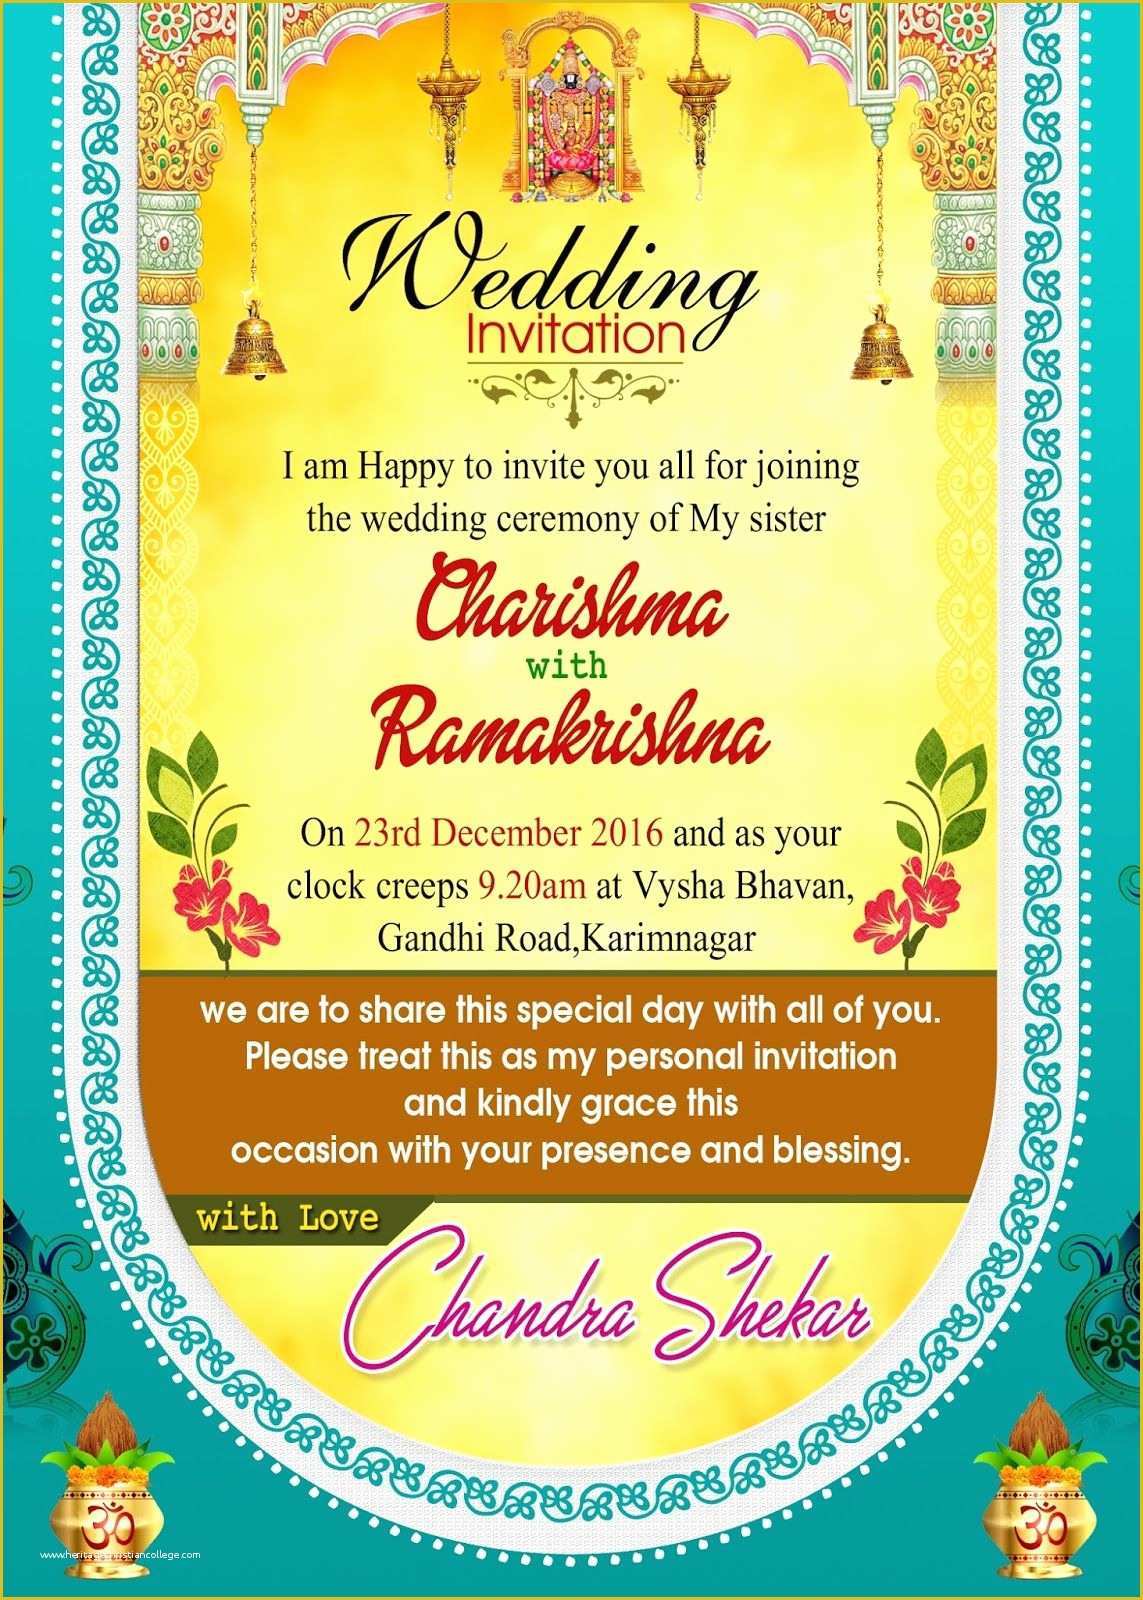 Indian Engagement Invitation Cards Templates Free Download Of Pin by Kakuli Mishra On Indian Wedding Invitations